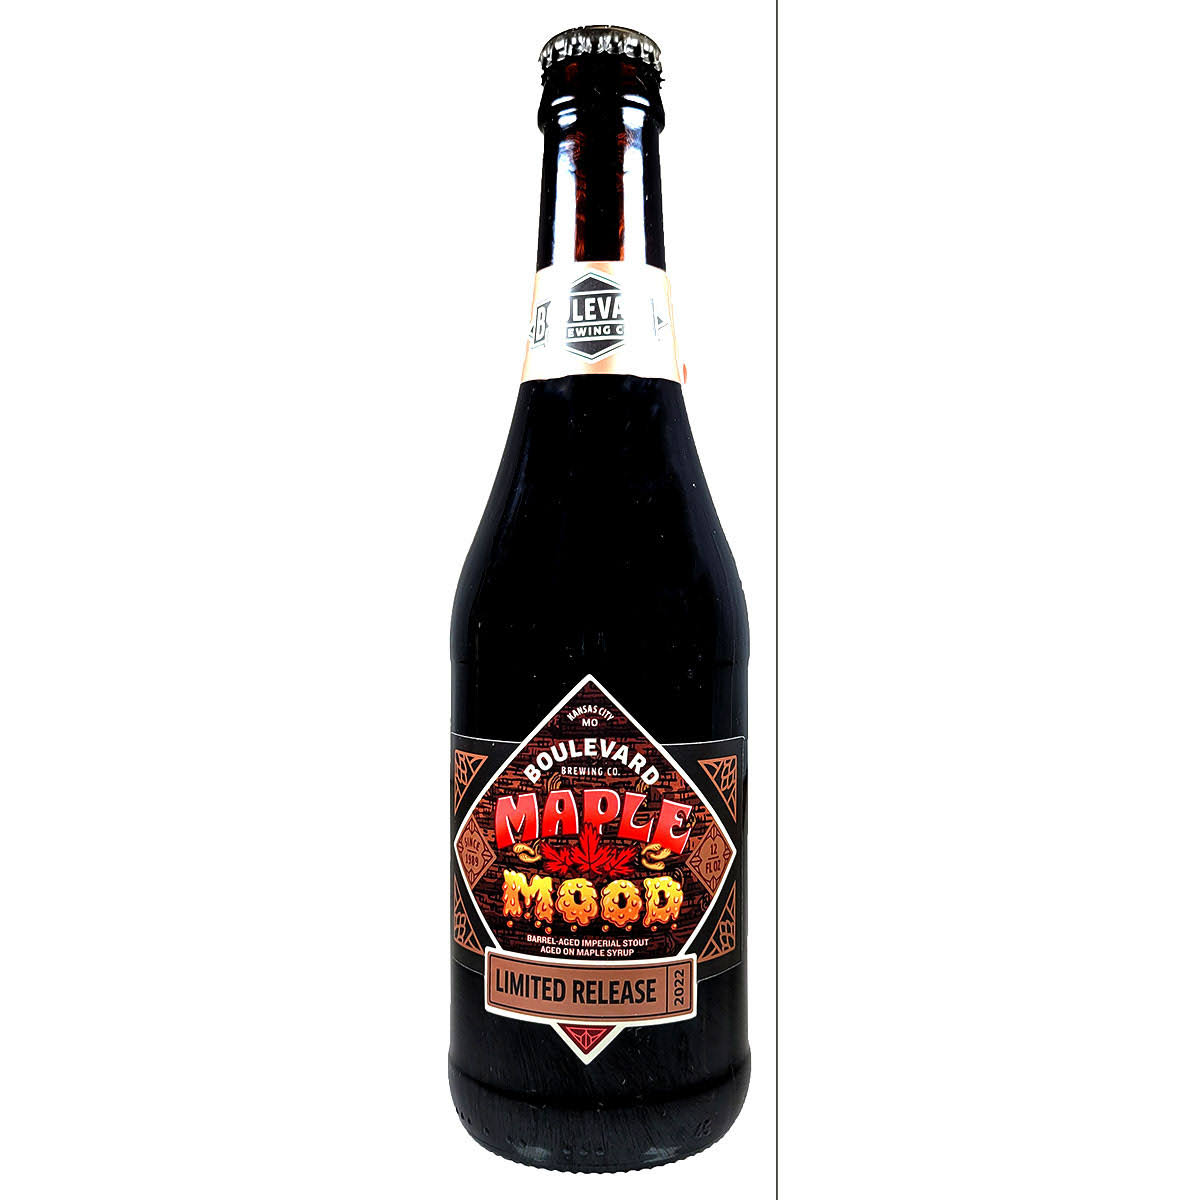 Boulevard Maple Mood Barrel-Aged Imperial Stout